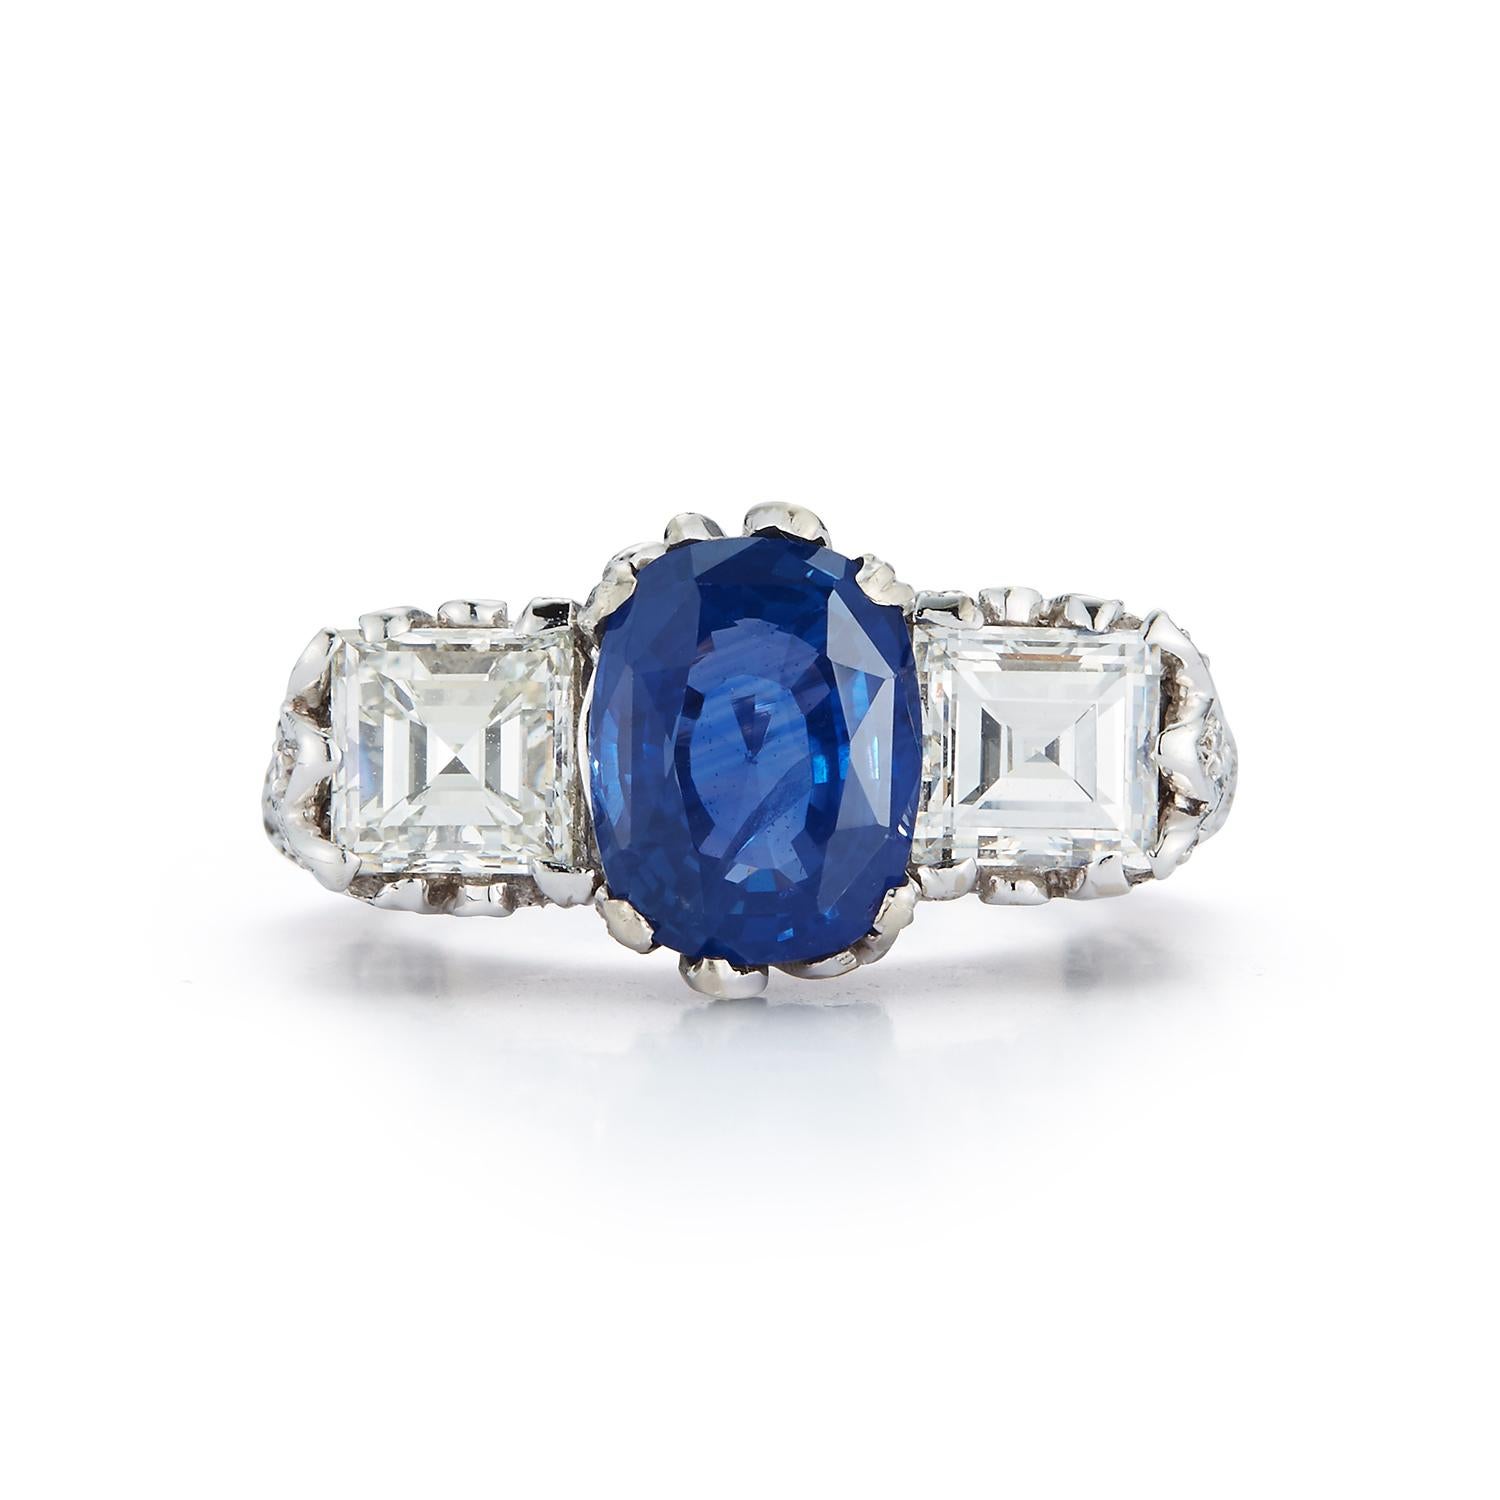 AGL Certified Sapphire & Diamond Three Stone filigree Ring set in platinum.
Art Deco. Made Circa 1920
Sapphire Weight: 3.72 Cts
Diamond WeighT approx .80 cts
Ring Size: 6.25
Re-sizable free of charge 
